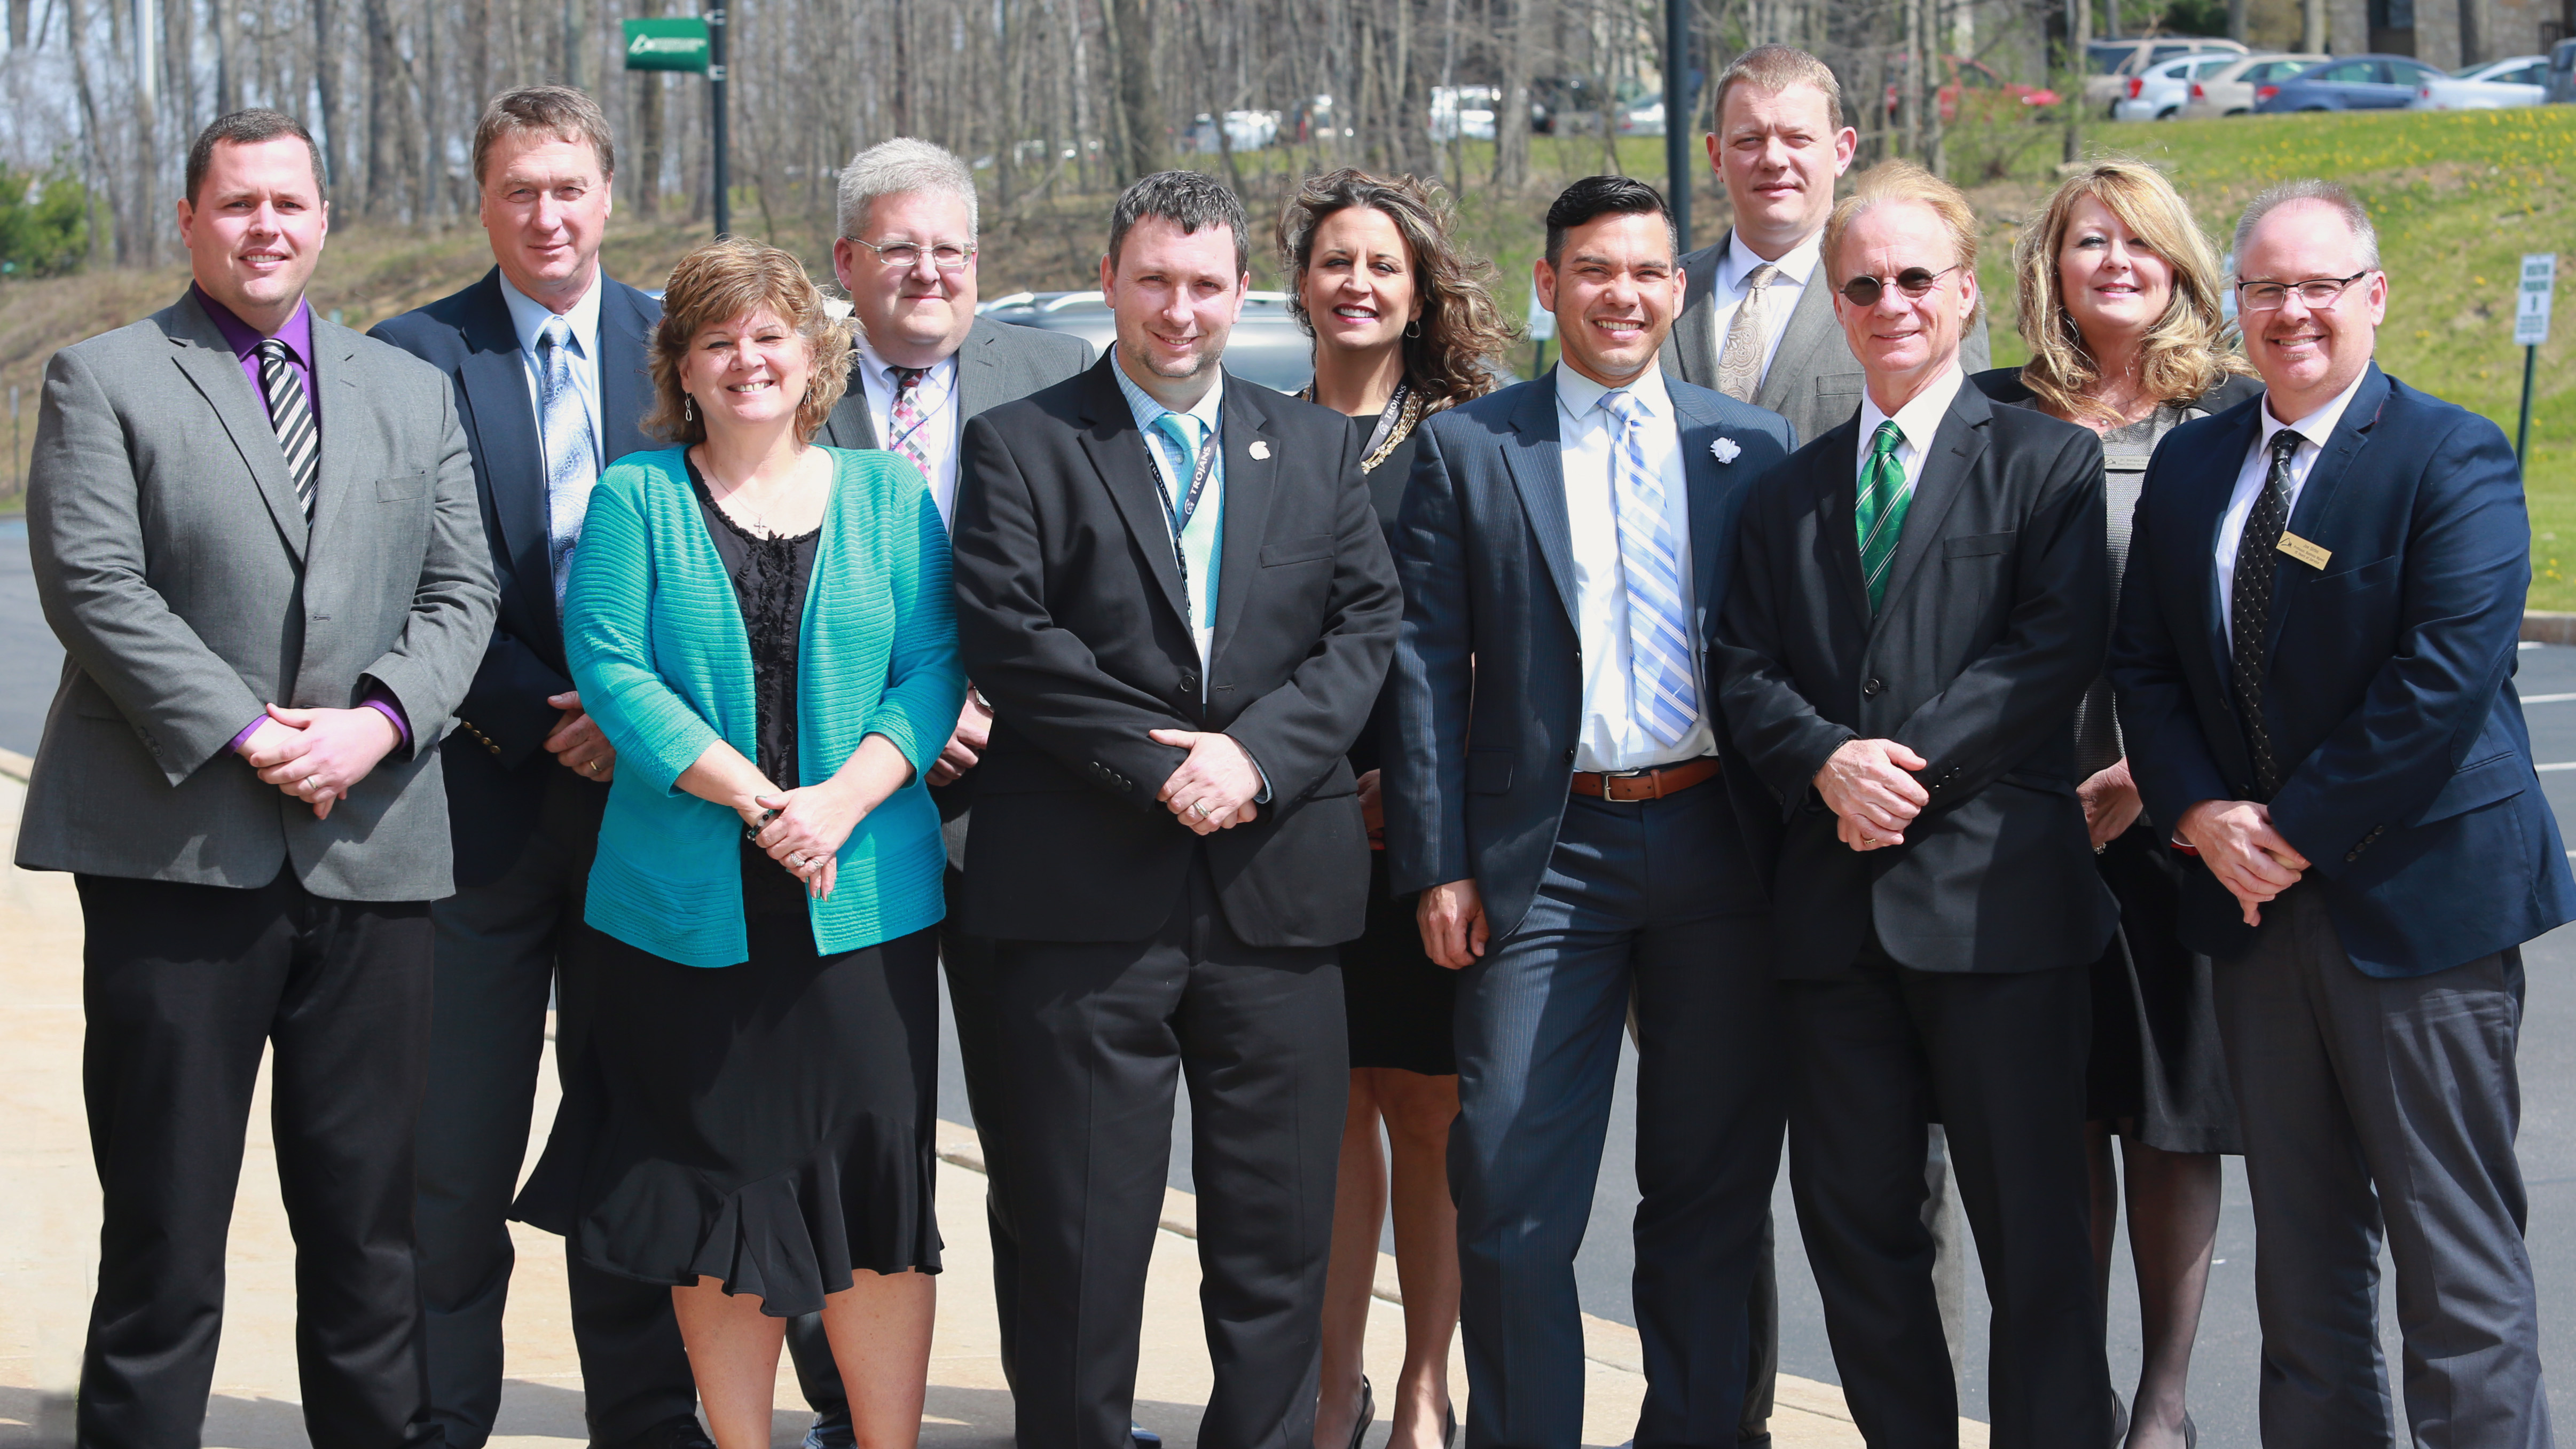 Individuals (from left to right) include: Brian Thompson, Principal at Berlin Brothersvalley; Tim Janocko, Principal at Clearfield; Dr. Susan Spaid, School Counselor at Clearfield; Terry Struble, Superintendent at Clearfield; Mike Vuckovich, Director of Education at Greater Johnstown; Amy Arcurio, Assistant Superintendent at Greater Johnstown; Wil Del Pilar, Deputy Secretary for the Pennsylvania Department of Education; Rob Heinrich Principal at Greater Johnstown; Dr. Walter Asonevich, President of Pennsylvania Highlands; Dr. Melissa Murray, Dean of School Partnerships at Pennsylvania Highlands; Joe Slifko, Accelerated College Education Faculty Coordinator at Pennsylvania Highlands.